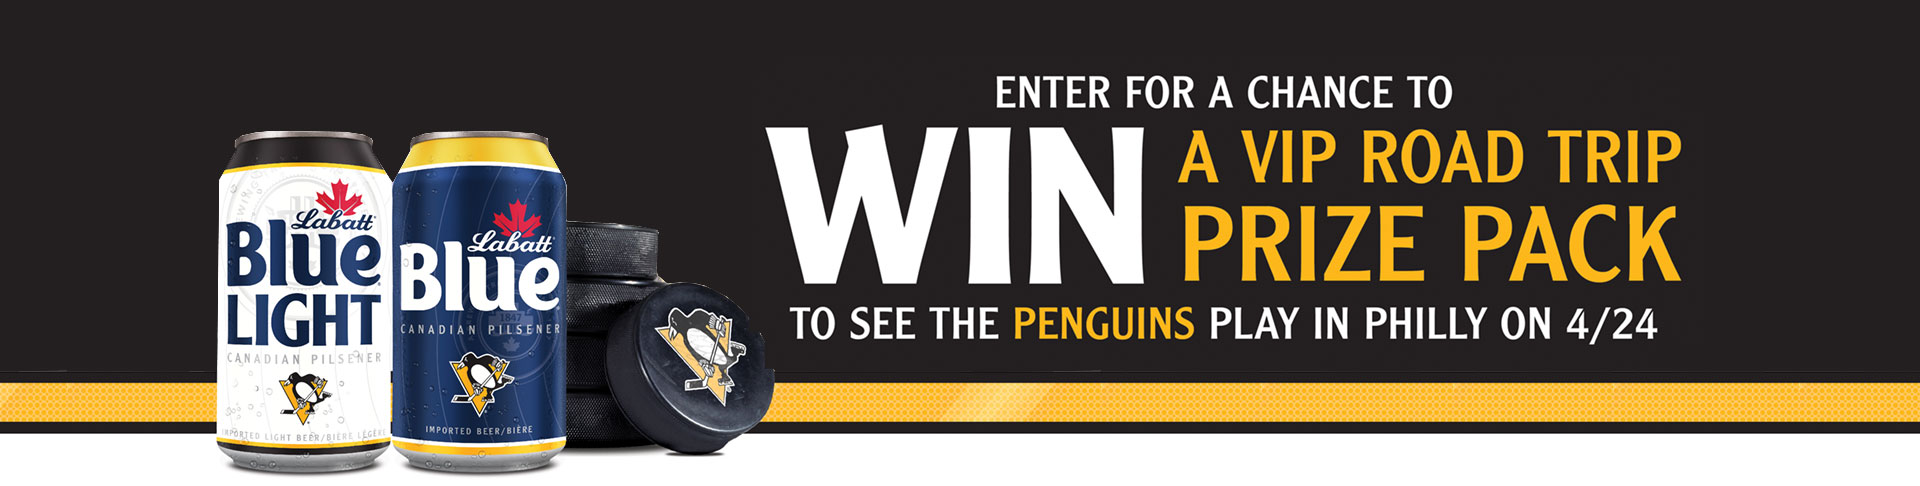 Image of cans of Labatt Blue, and Labatt Blue Light and hockey pucks, all branded with Pittsburgh Penguins colors and logo. The text reads: Enter for a chance to win a VIP Road Trip Prize Pack to see the Penguins play in Philly on April 24th, 2022.